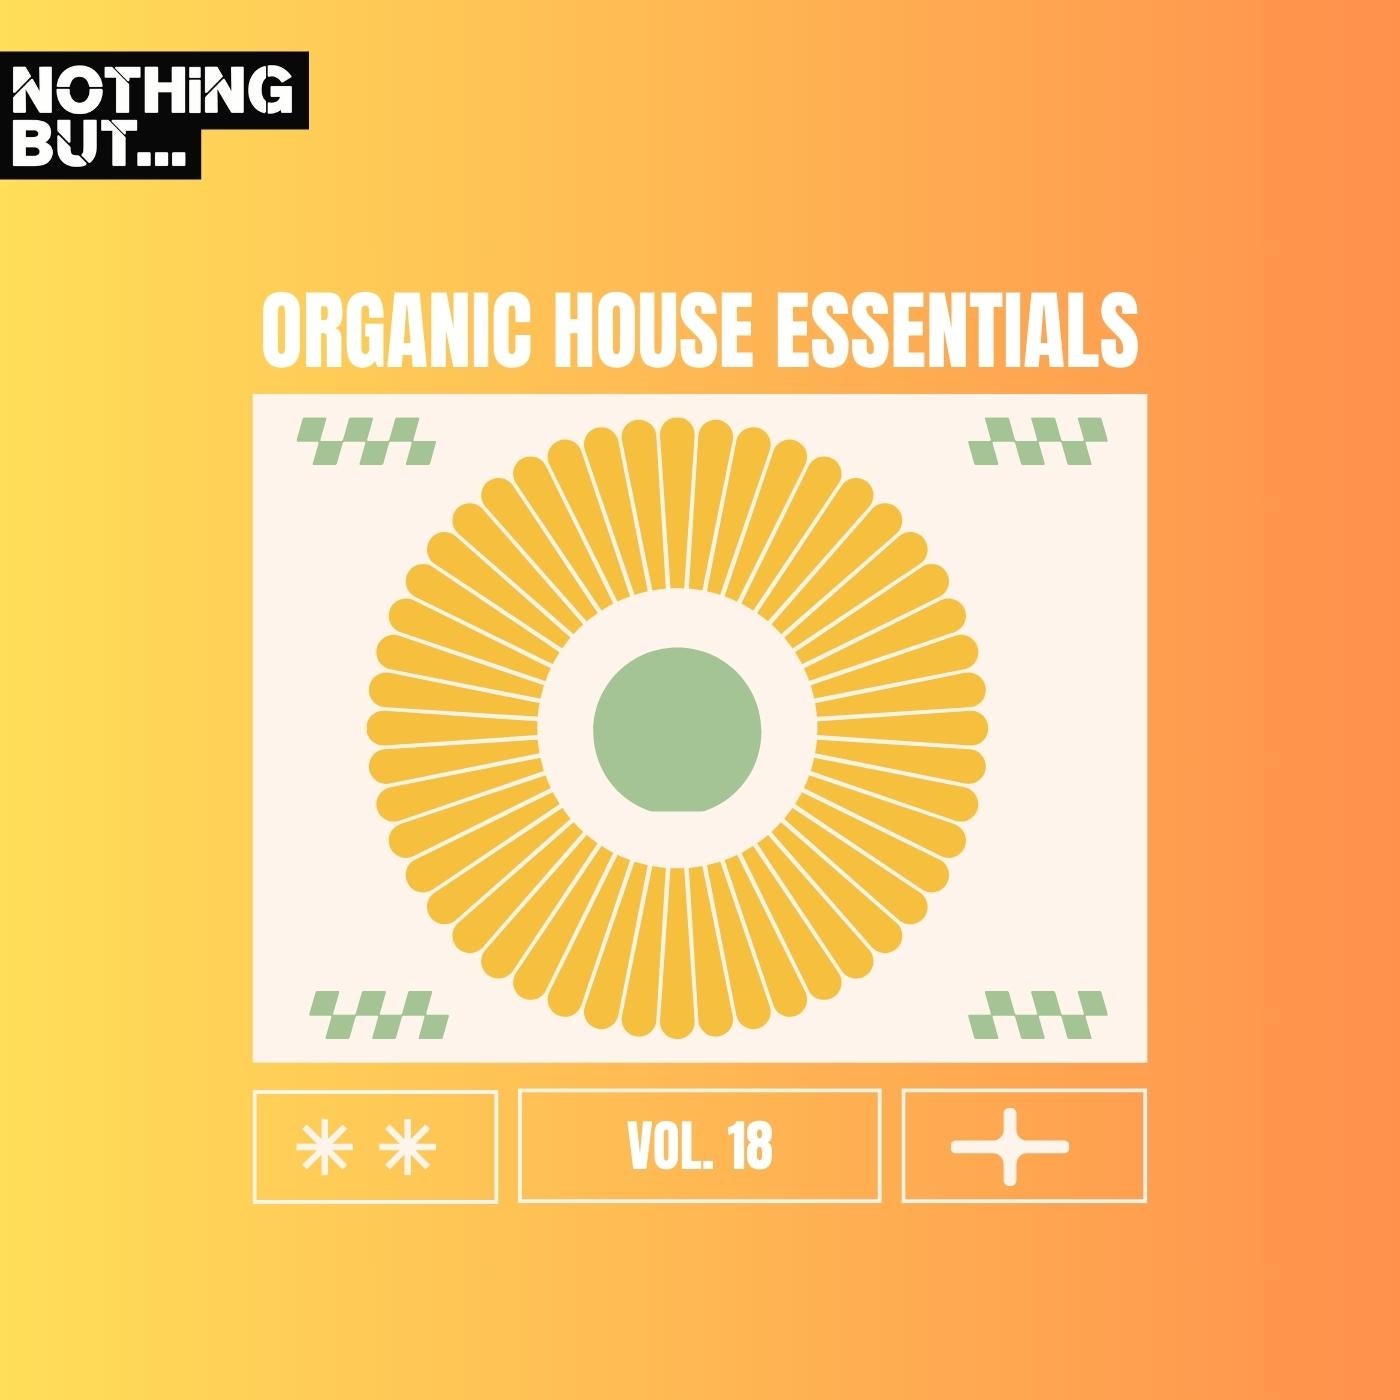 Nothing But... Organic House Essentials, Vol. 18